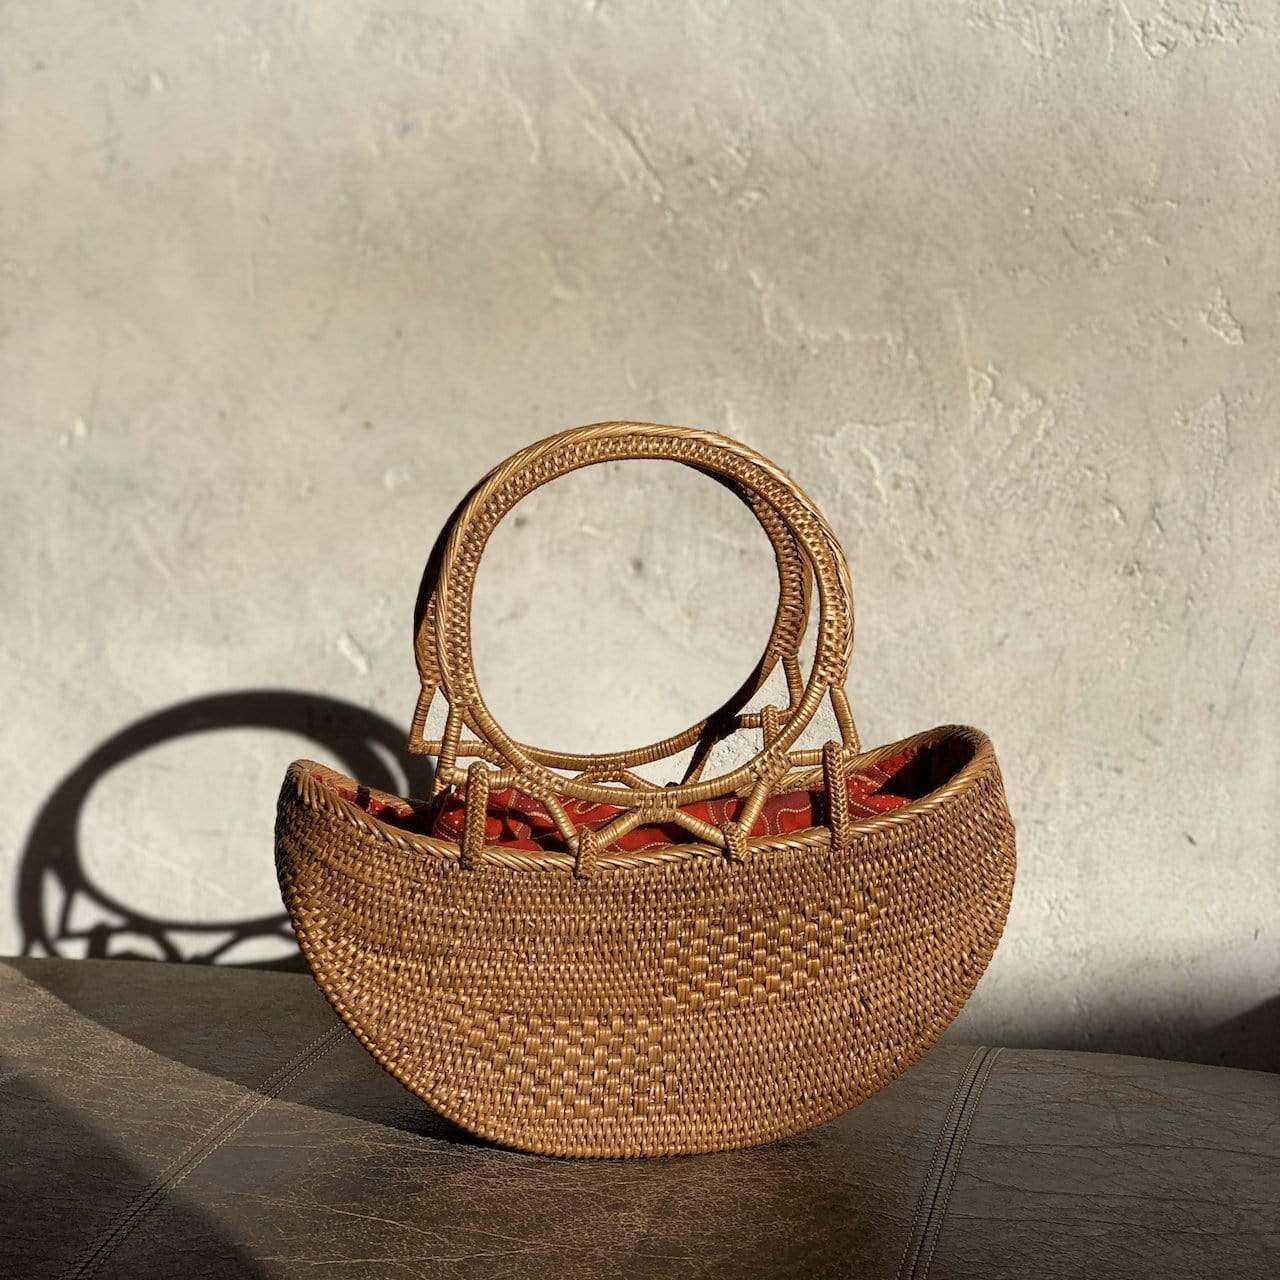 Bali Rattan Boat Clutch handmade by Ganapati Crafts Co. in Bali is the perfect accessory for any stylish woman